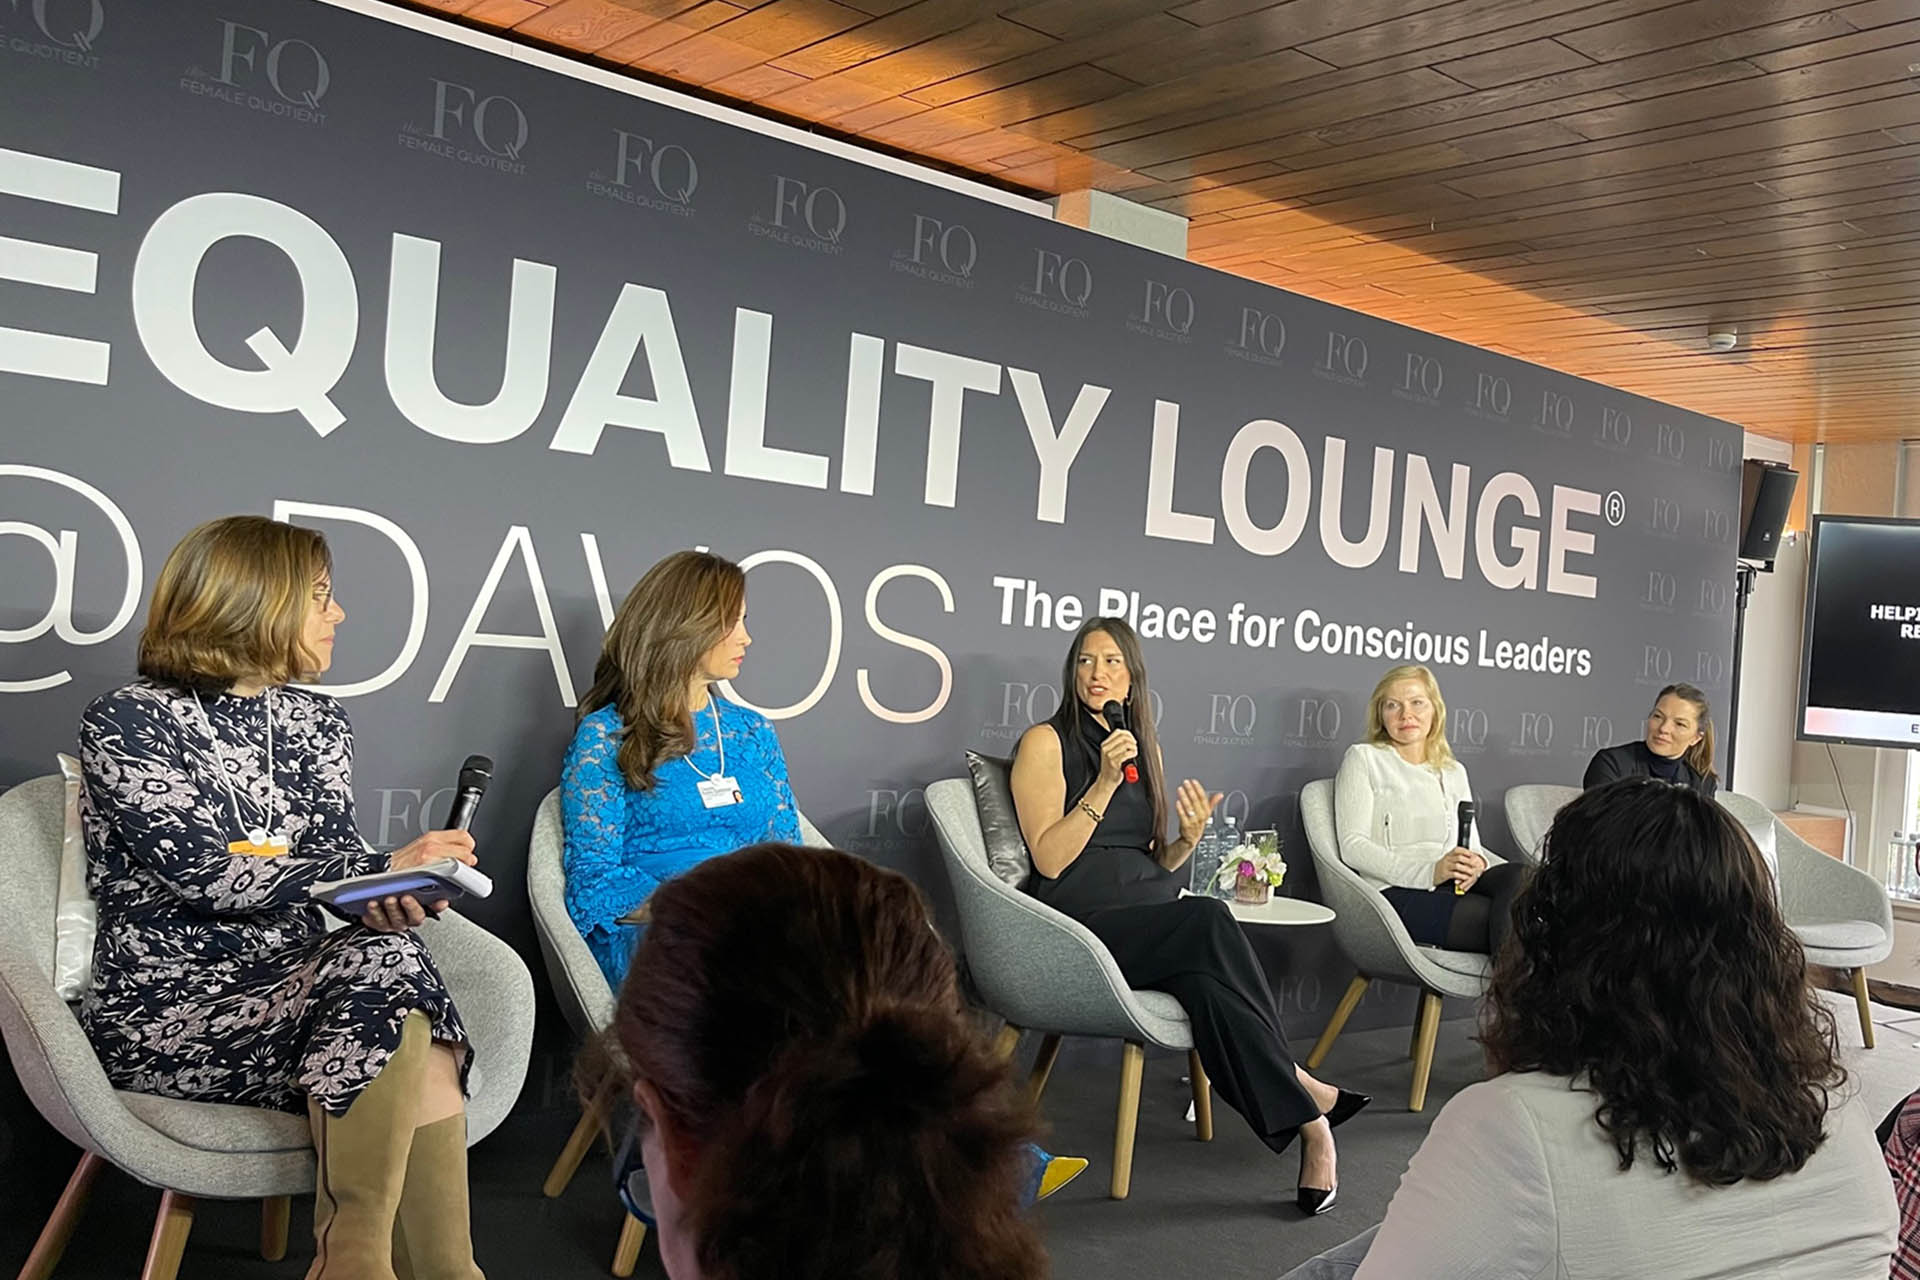 NZW AT FQ EQUALITY LOUNGE IN DAVOS